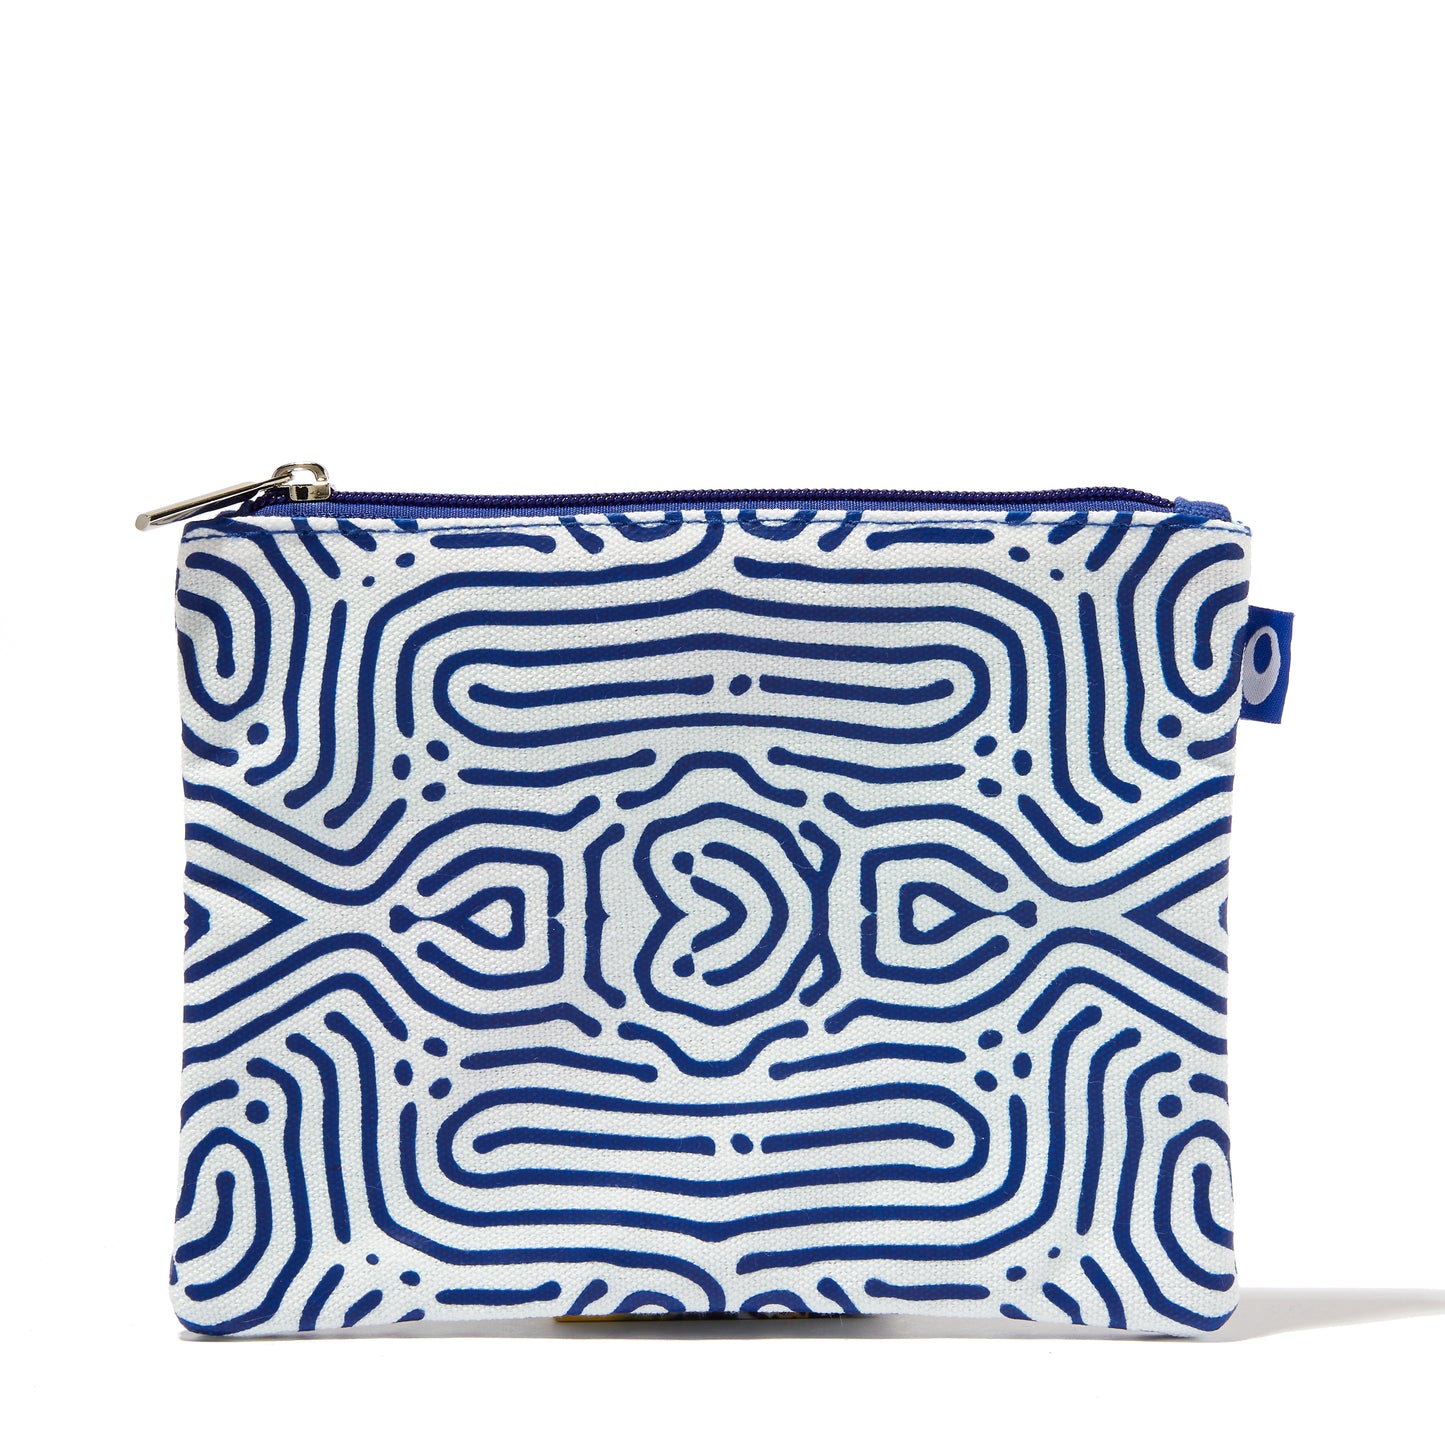 THE OBSERVATORY COSMETIC POUCH